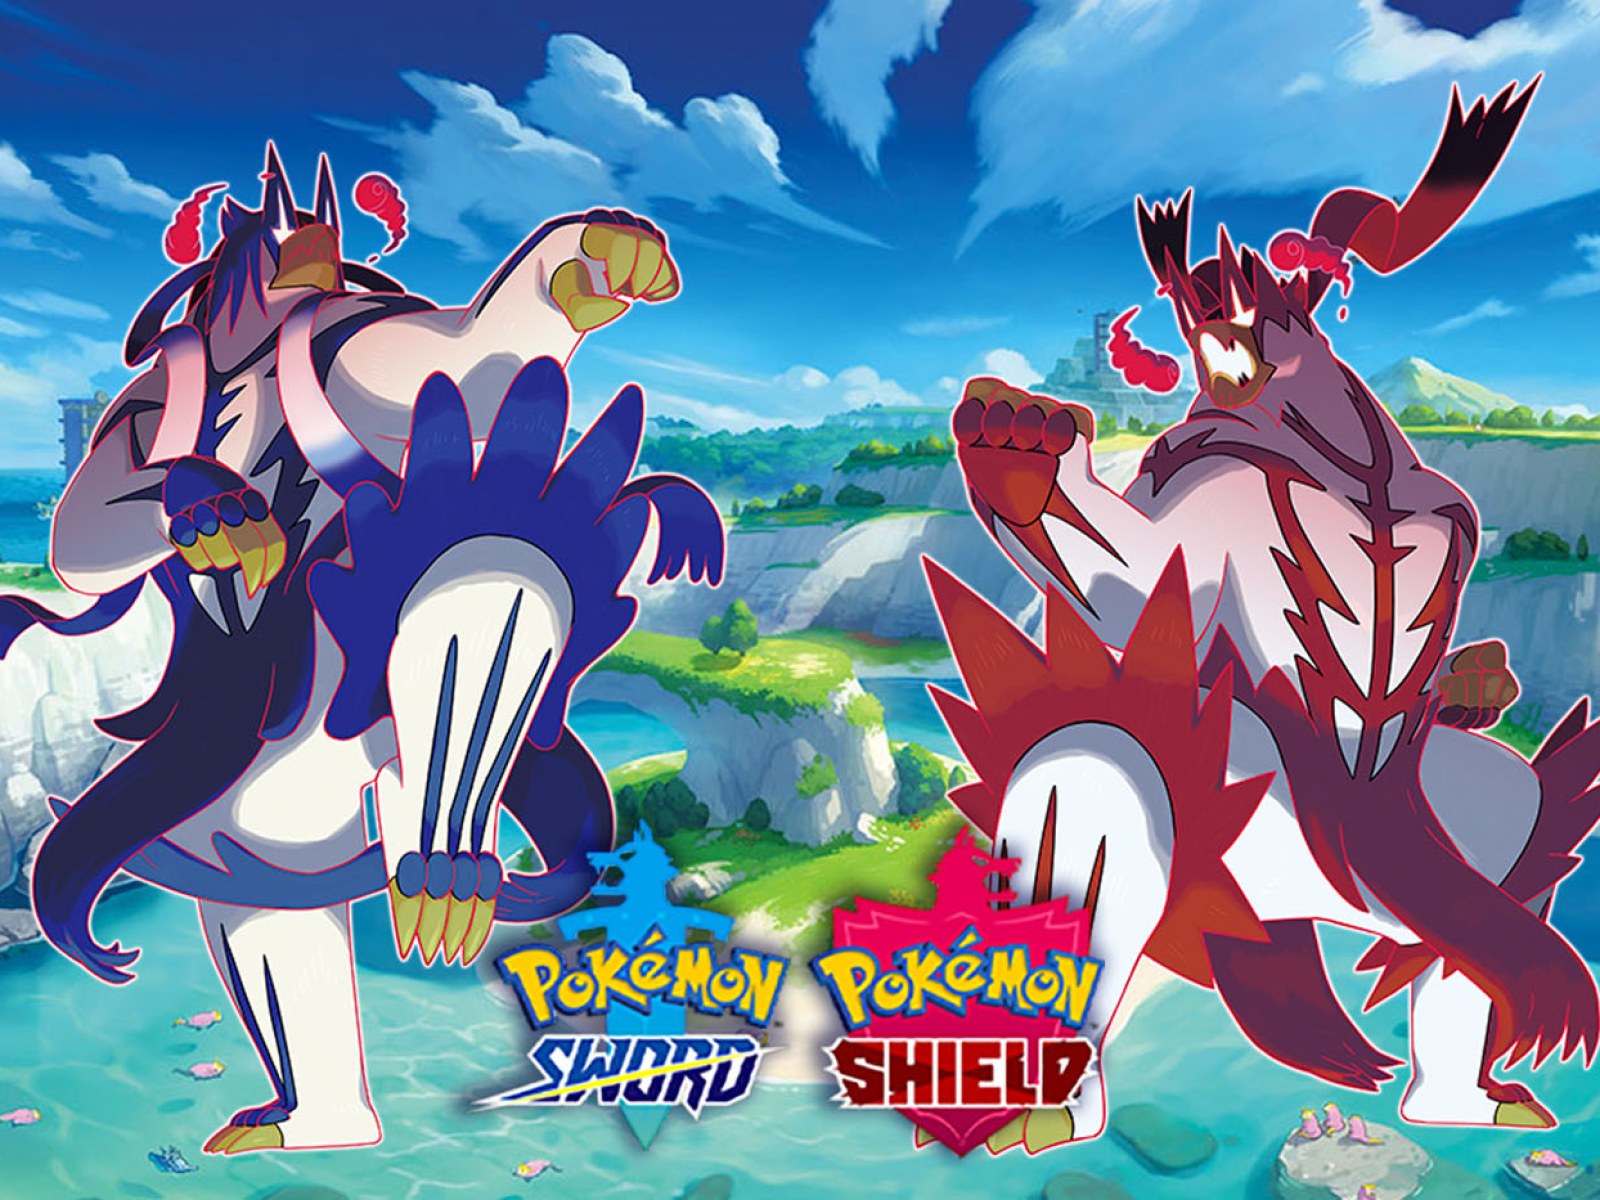 Pokemon Sword and Shield: Isle of Armor - Pokemon Type Strengths and  Weaknesses Guide